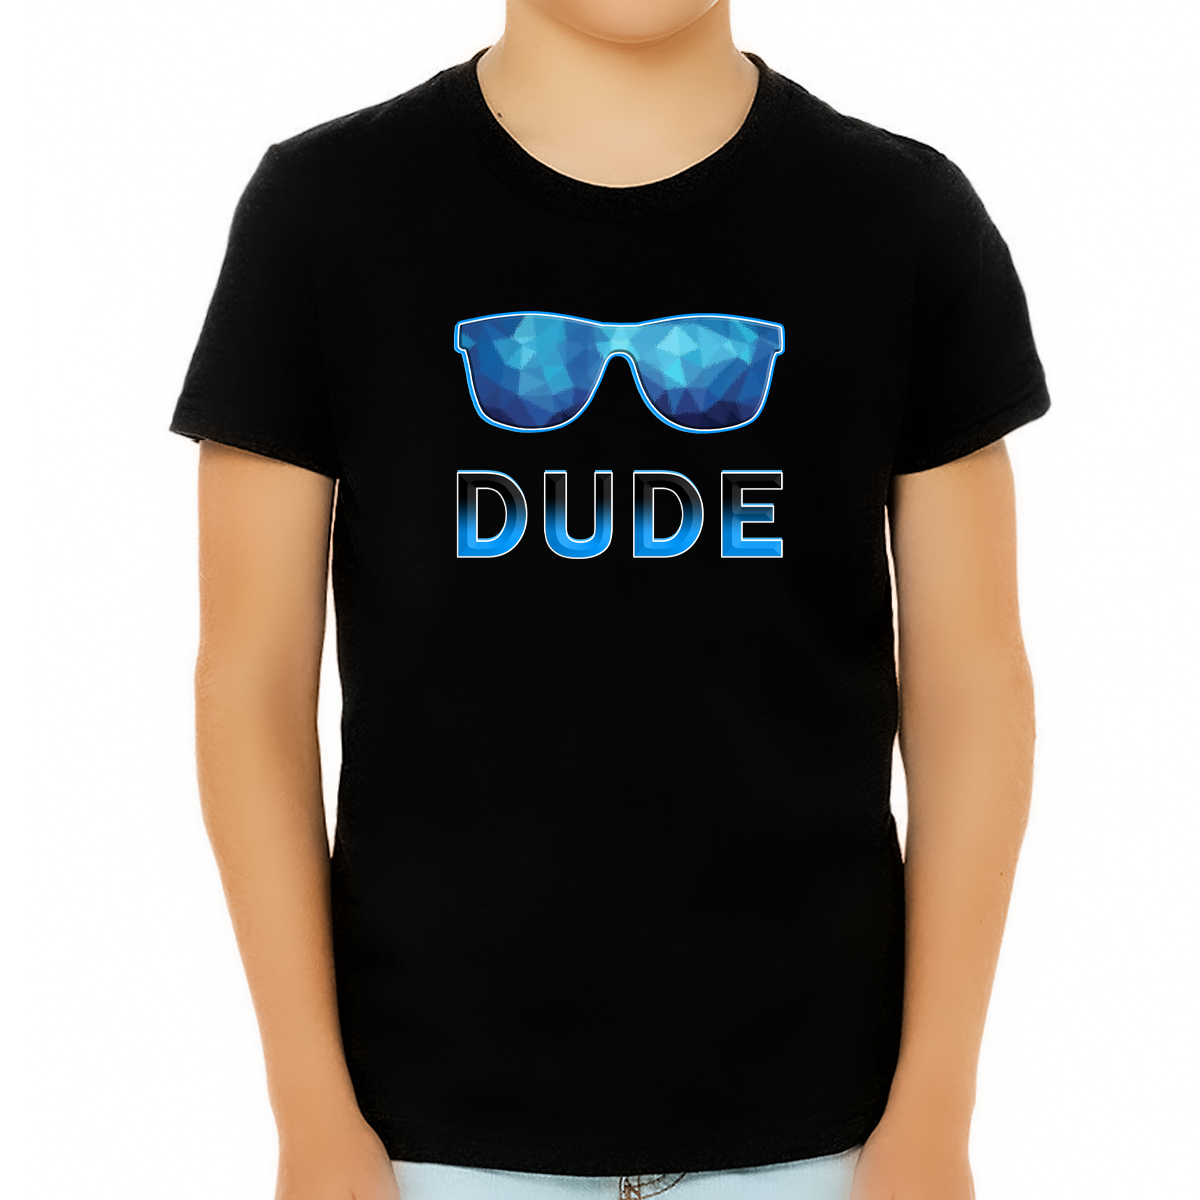 PERFECT DUDE SHIRT for Boys Youth Kids - Pound It Noggin Birthday Gift Dude T-Shirt